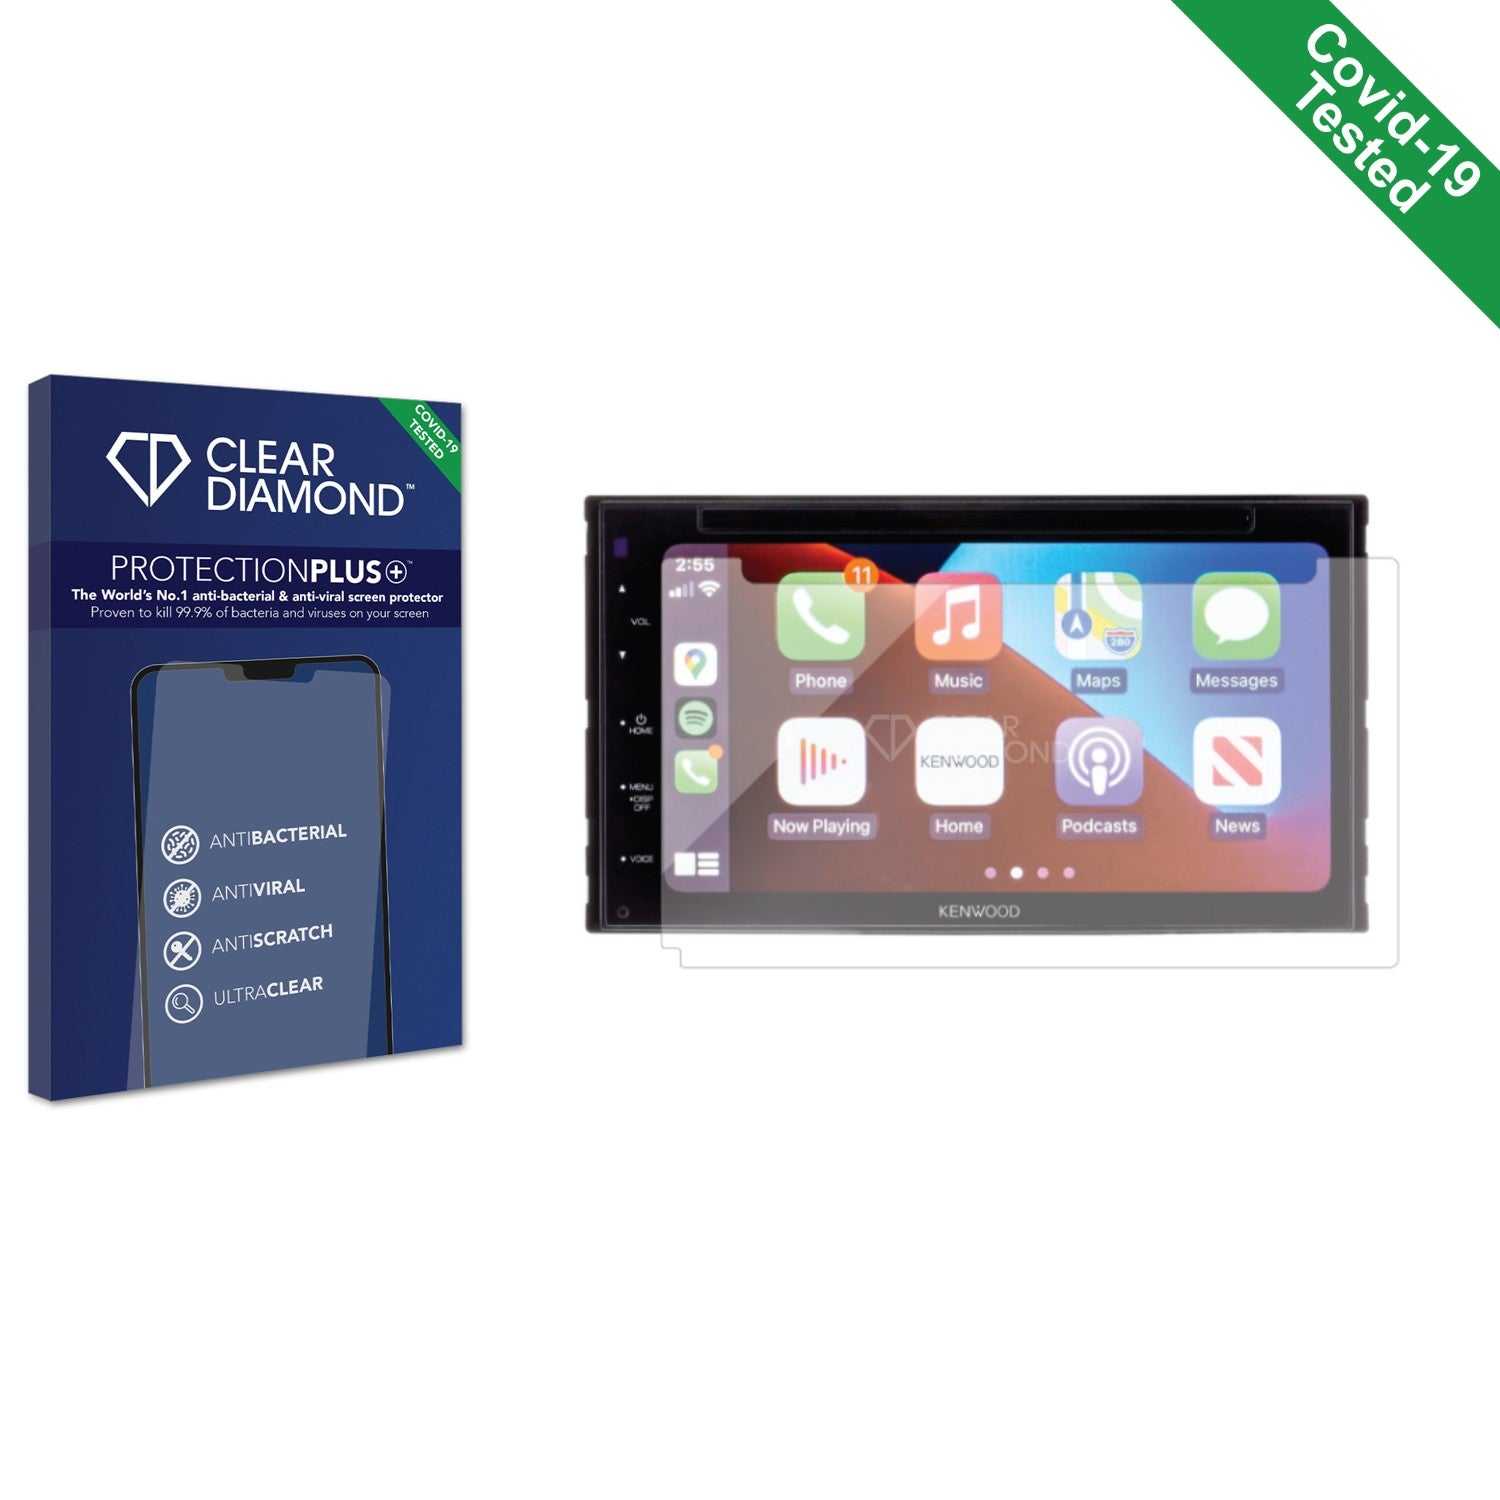 ScreenShield, Clear Diamond Anti-viral Screen Protector for Kenwood DDX5707S